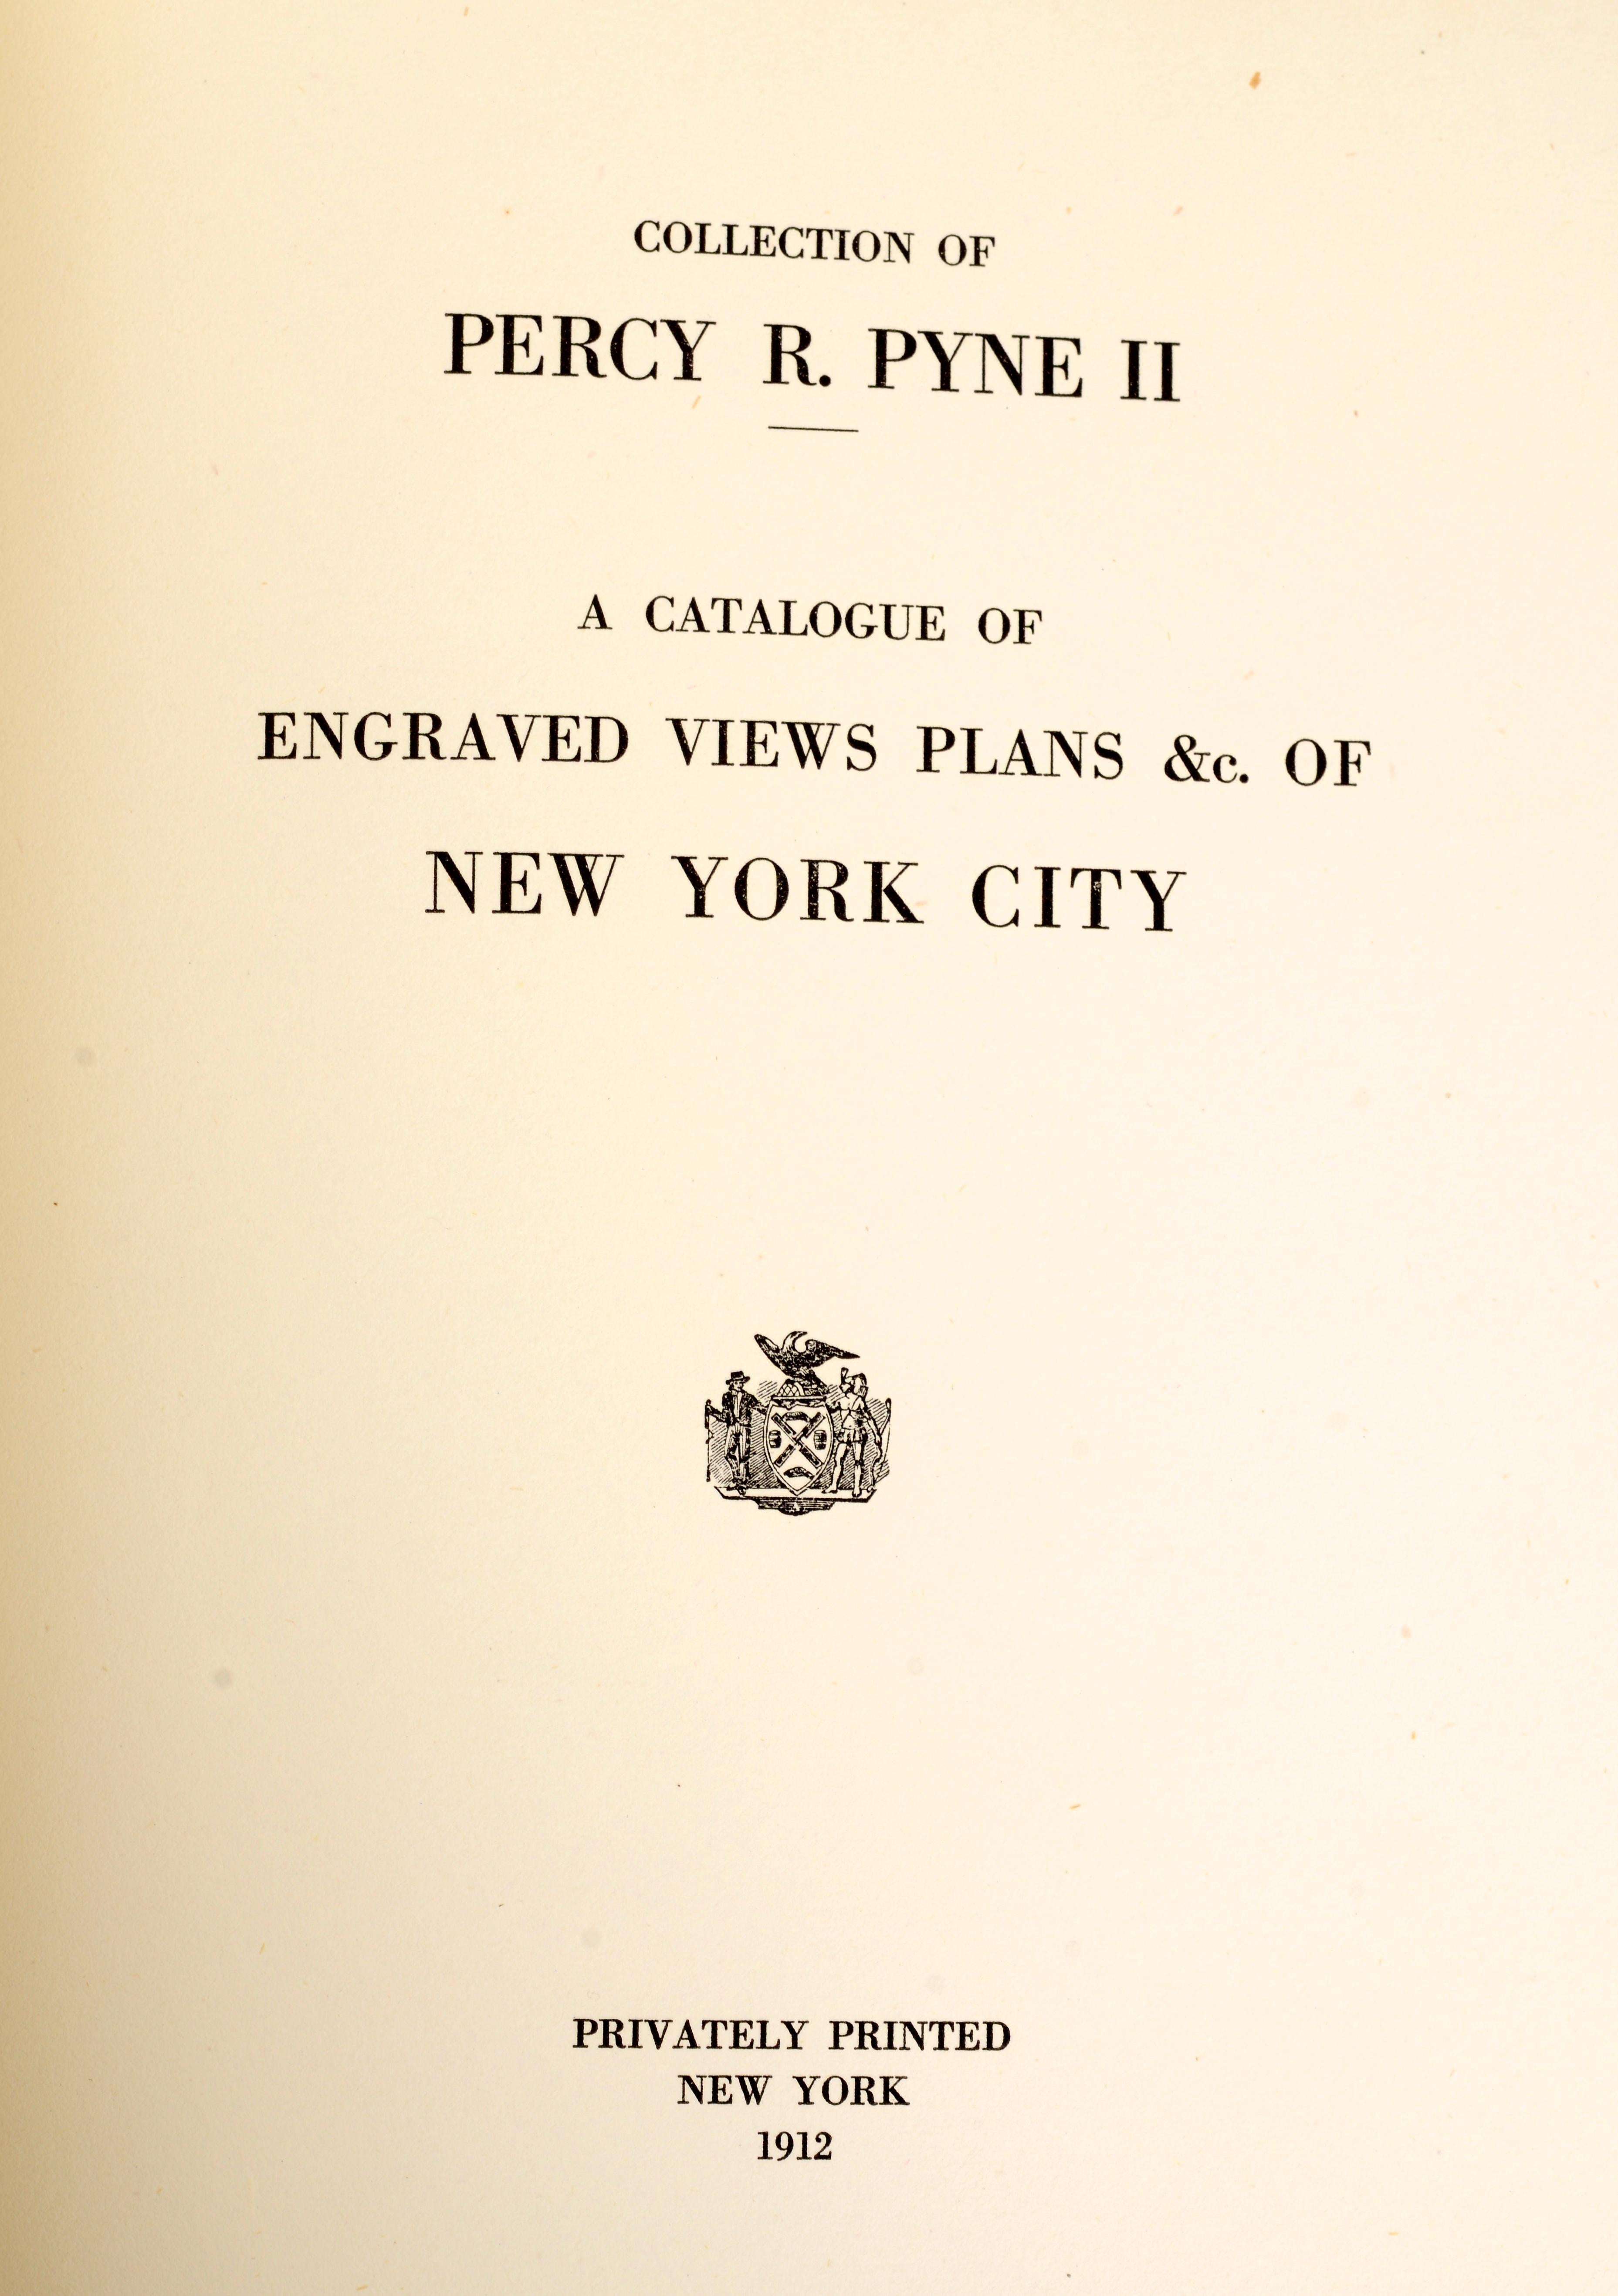 A catalogue of engraved views, plans, etc., Of New York City, (The Collection of Percy R. Pyne II). Privately Printed by The De Vinne Press, New York, 1912. Limited to 100 copies. Grey cloth boards with gilt stamping to spine and front cover,